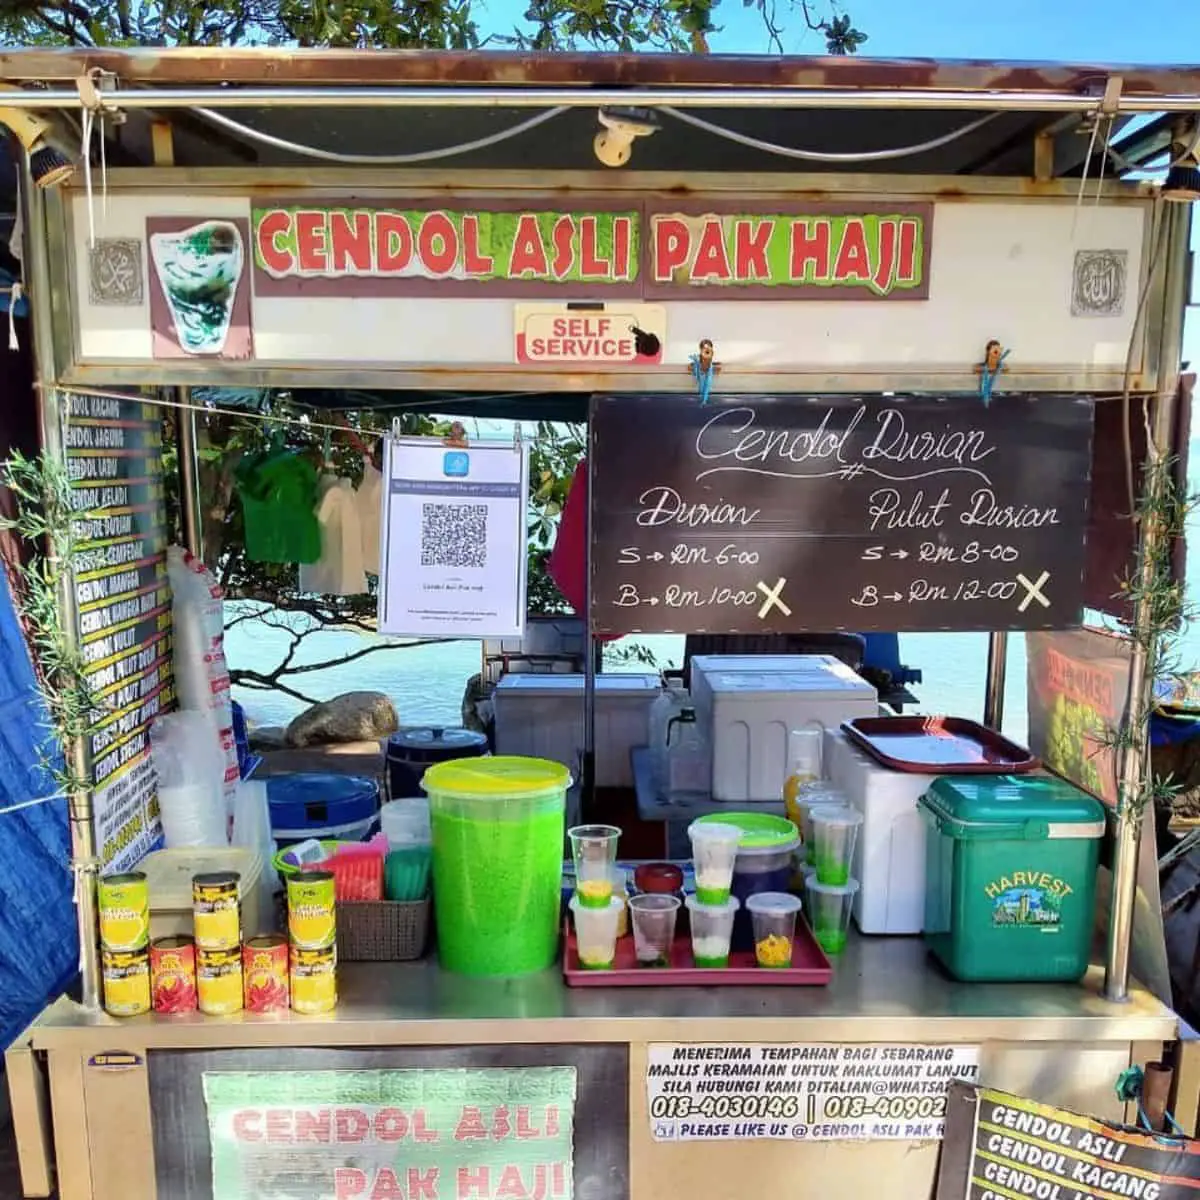 Asli Pak Haji stall with plastic glasses and canned milk on display in green and yellow hues